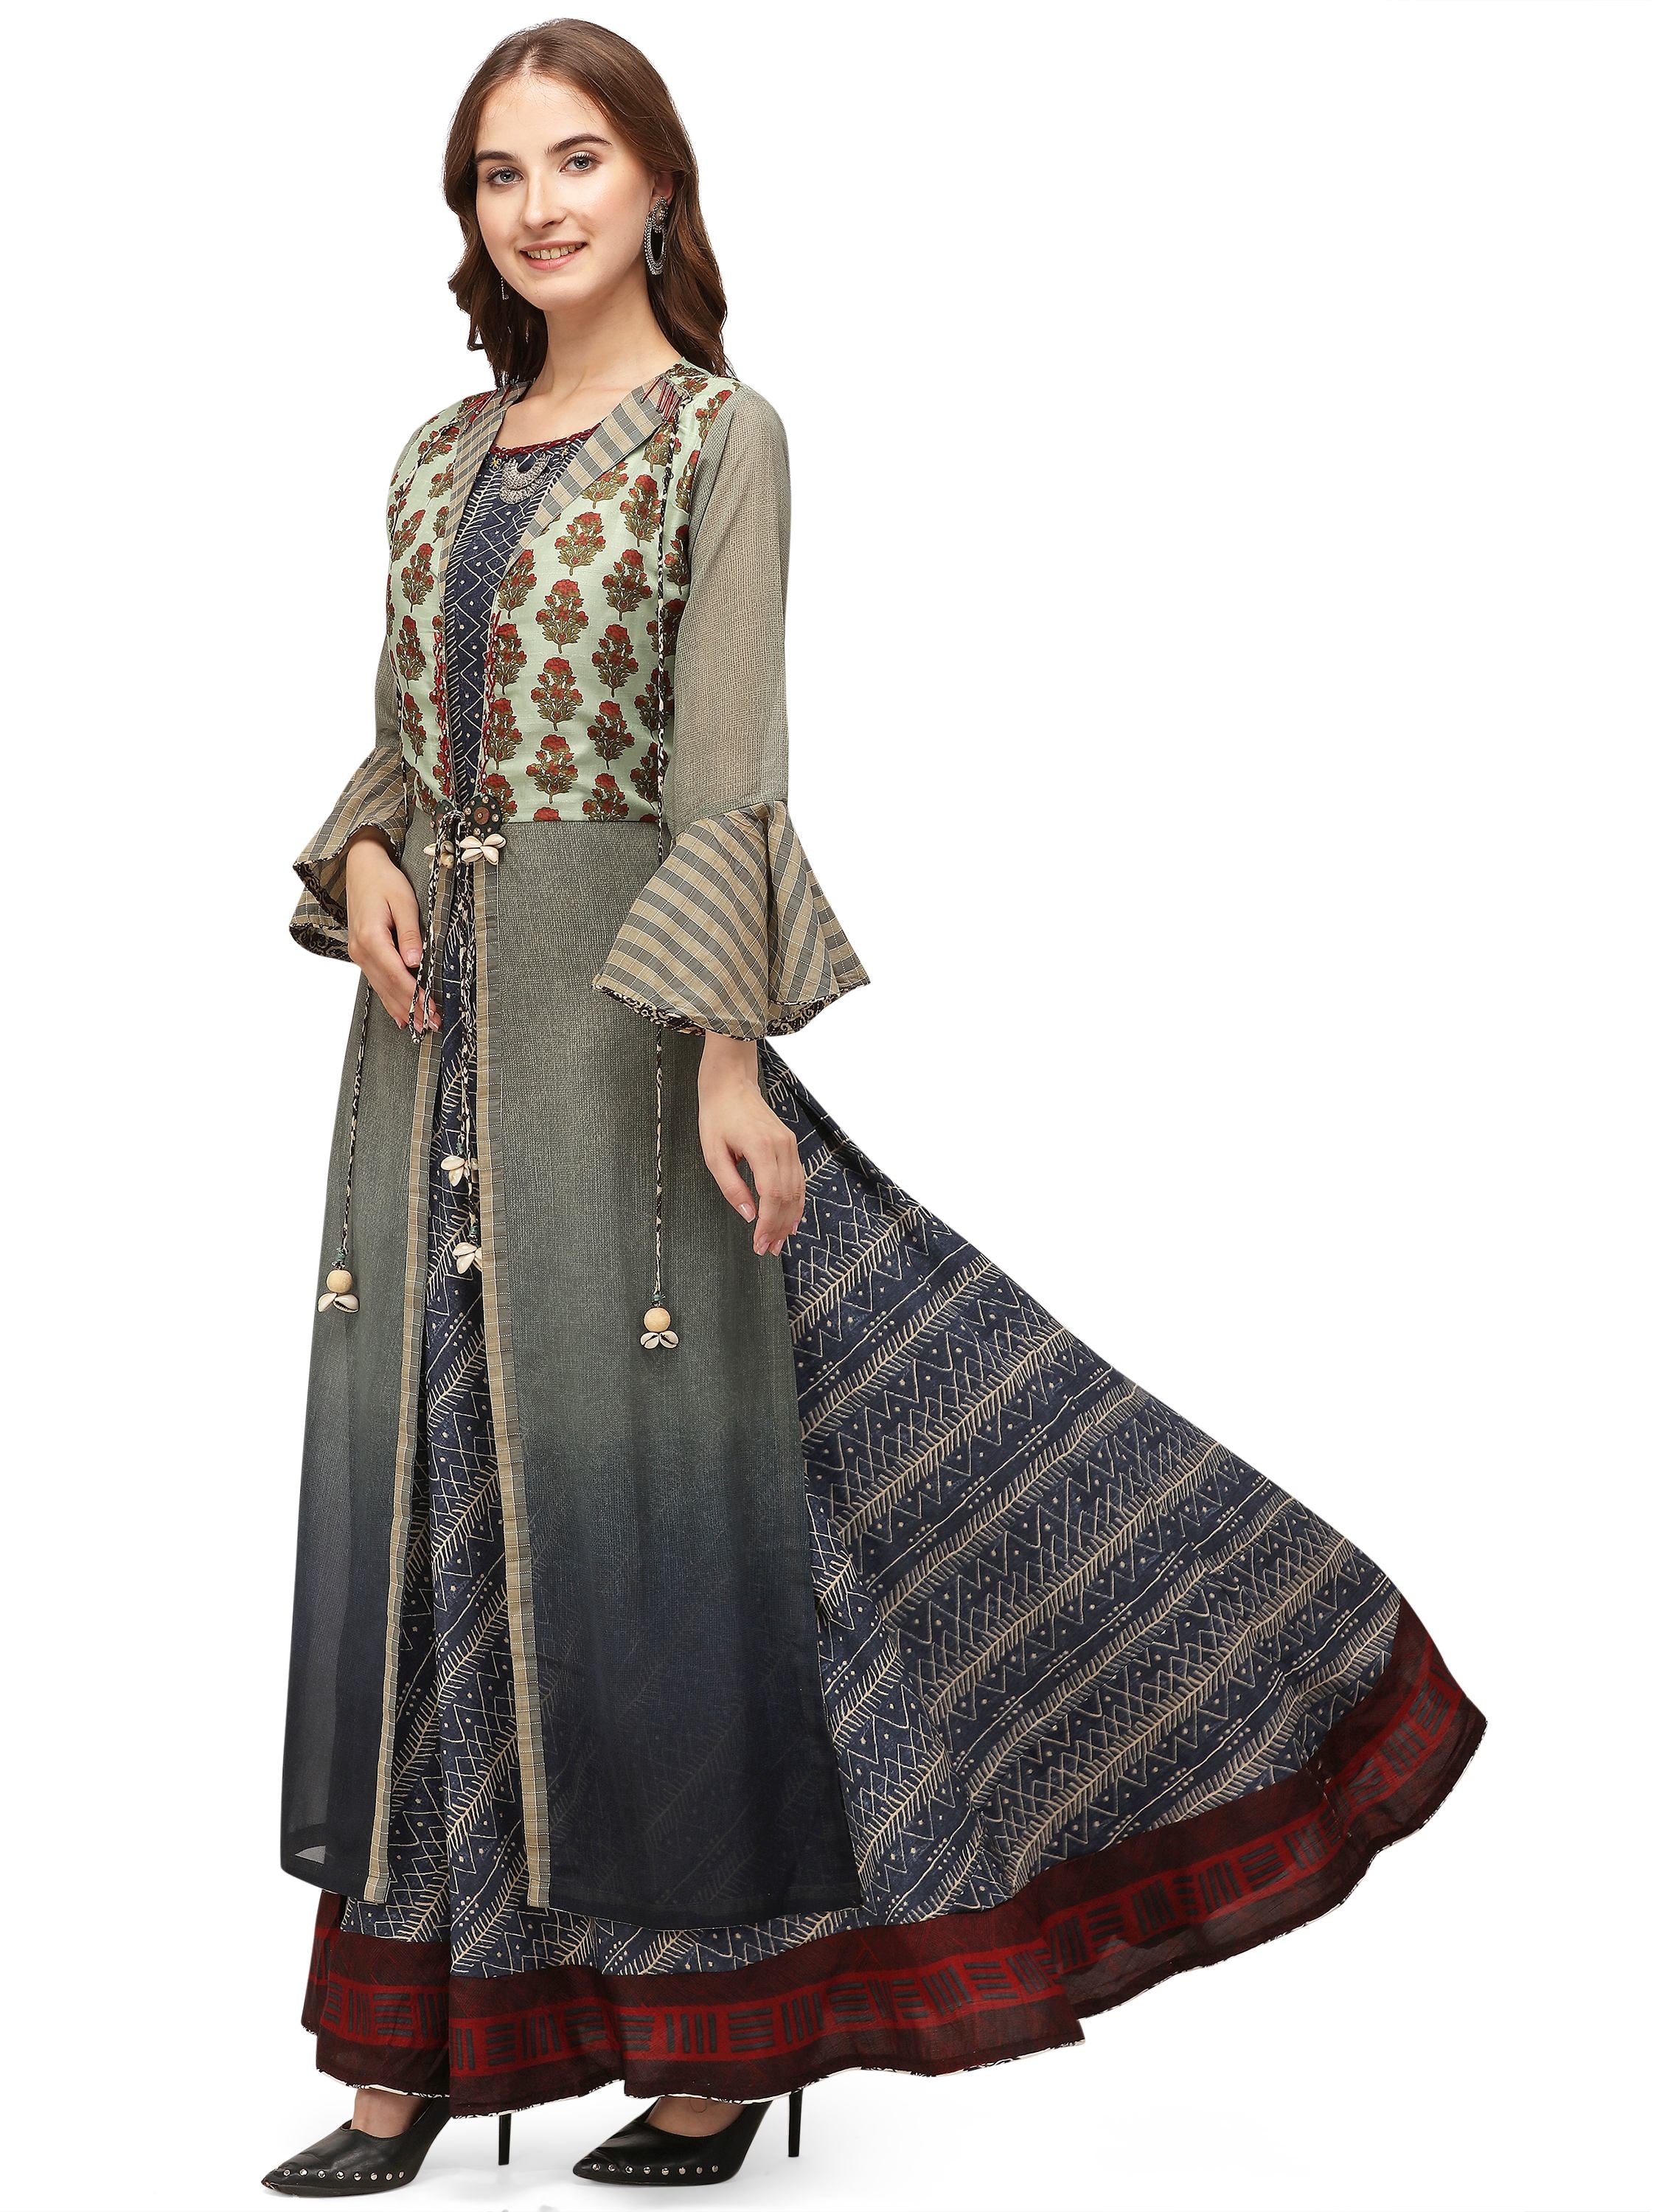 Women's Multi Color Blend Cotton Printed Gown And Jacket Ad-3005 - Navyaa